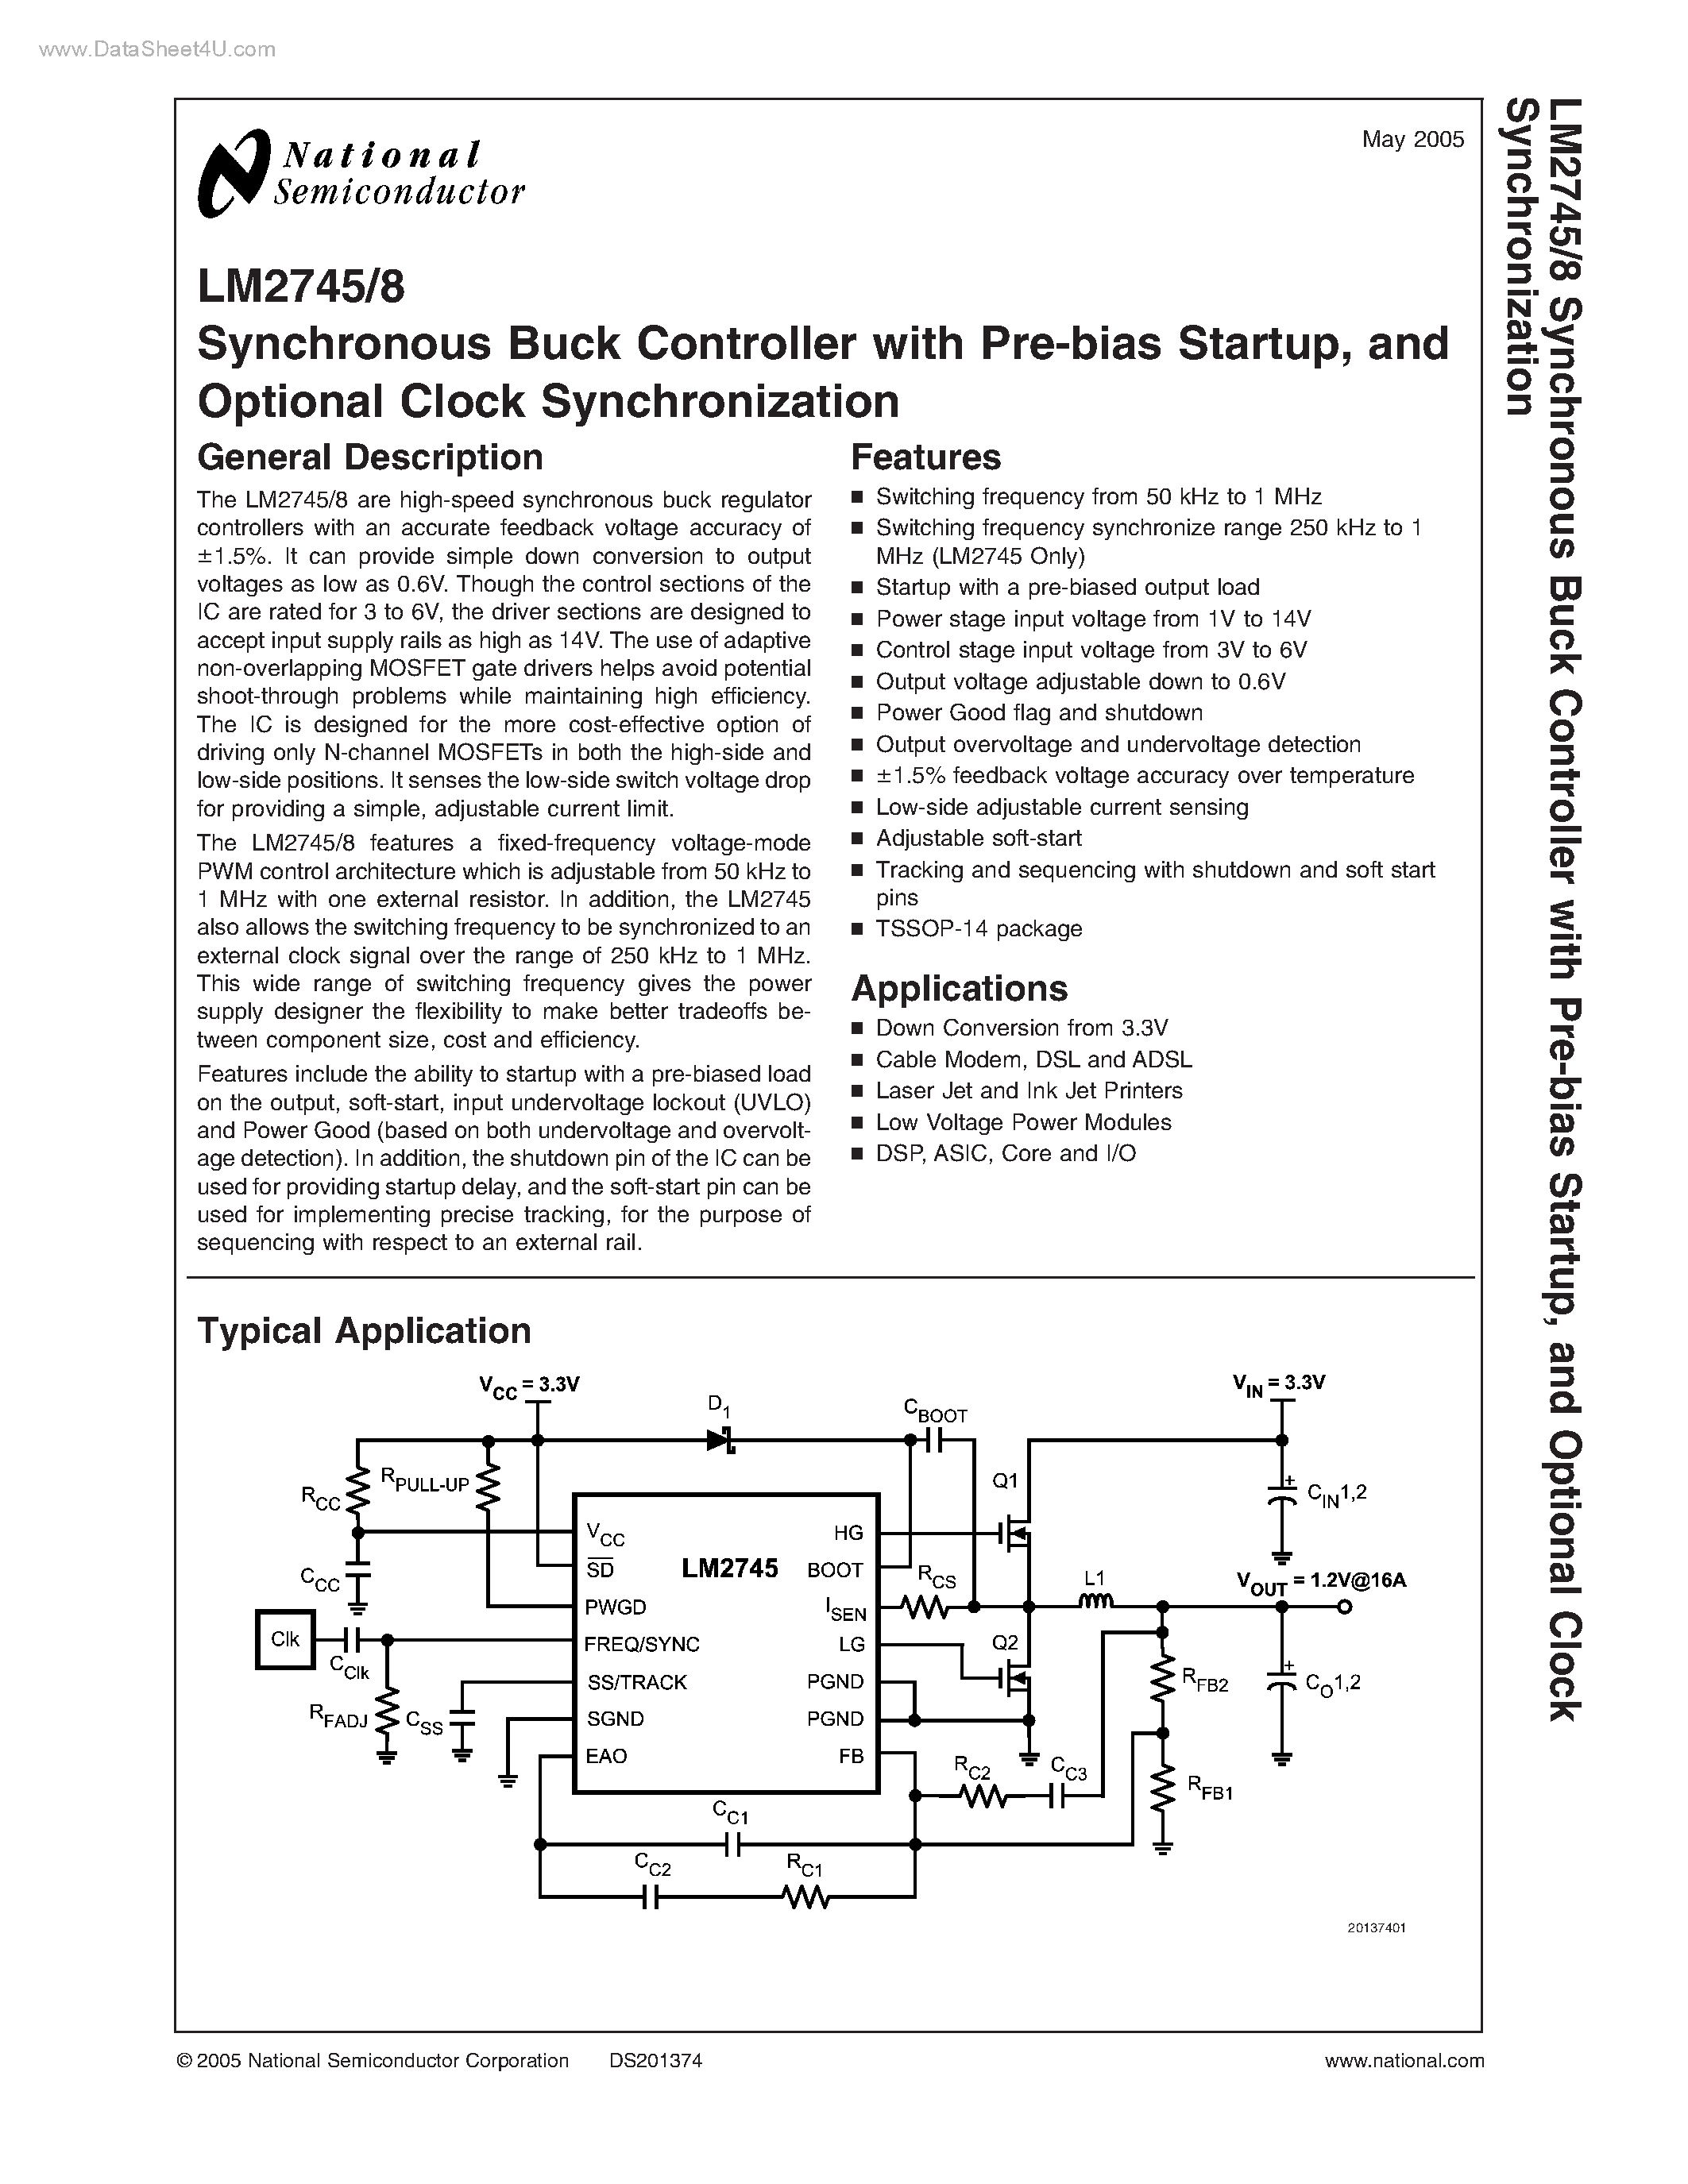 Даташит LM2745 - (LM2745 / LM2748) Synchronous Buck Controller страница 1